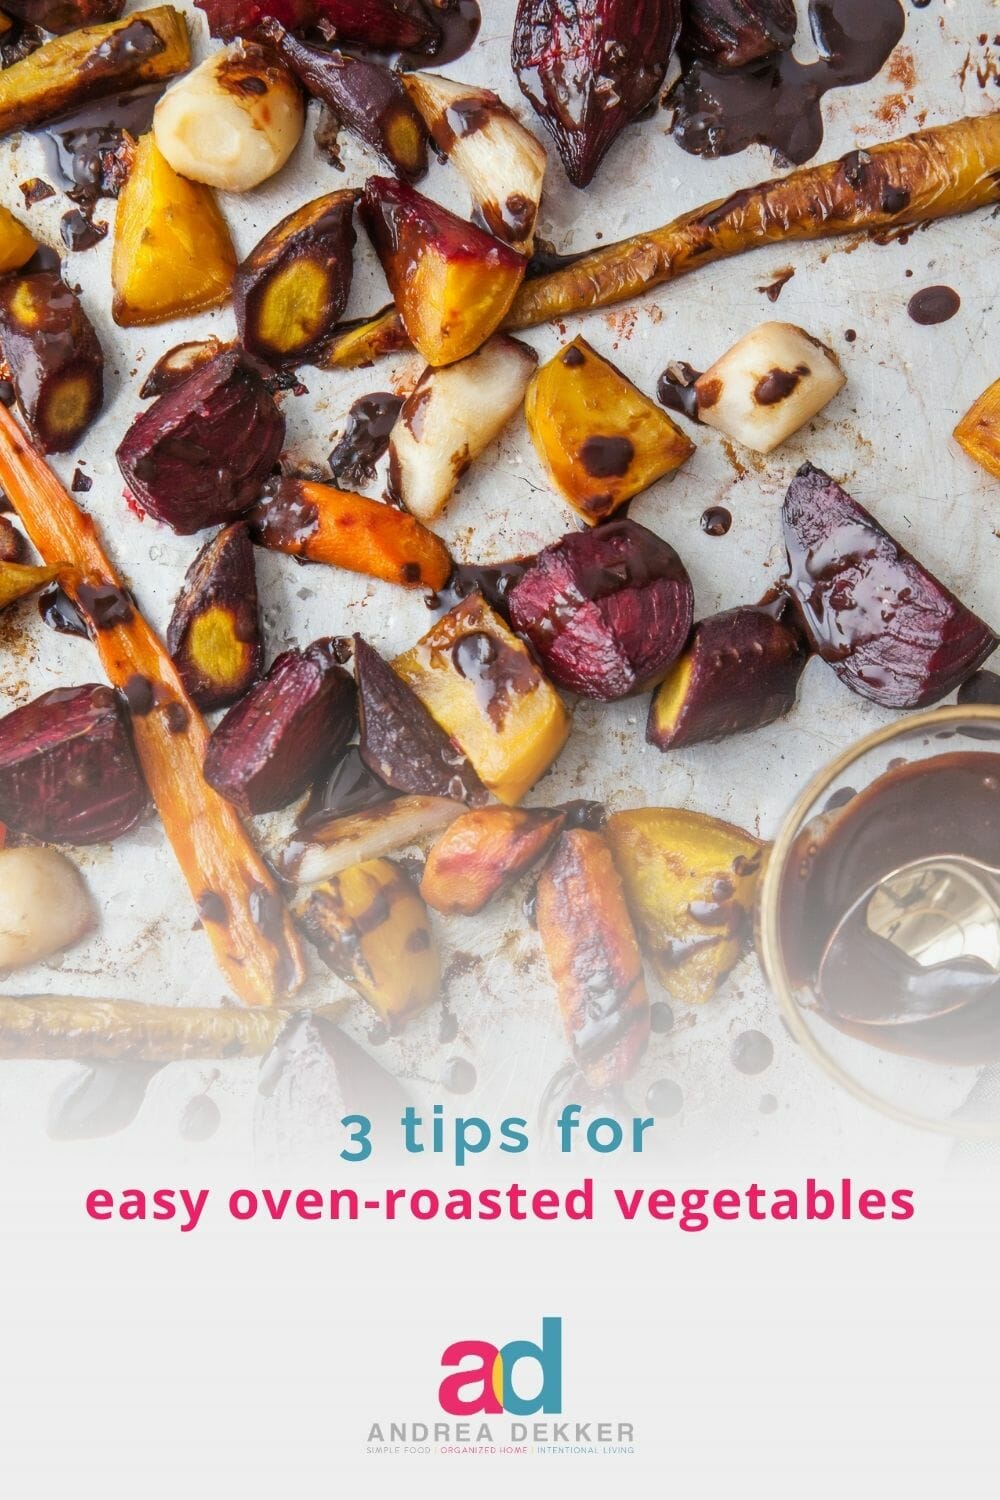 Excite your tastebuds and impress your family with this simple recipe for oven-roasted vegetables. My 3 bonus tips make the process practically fool-proof! via @andreadekker